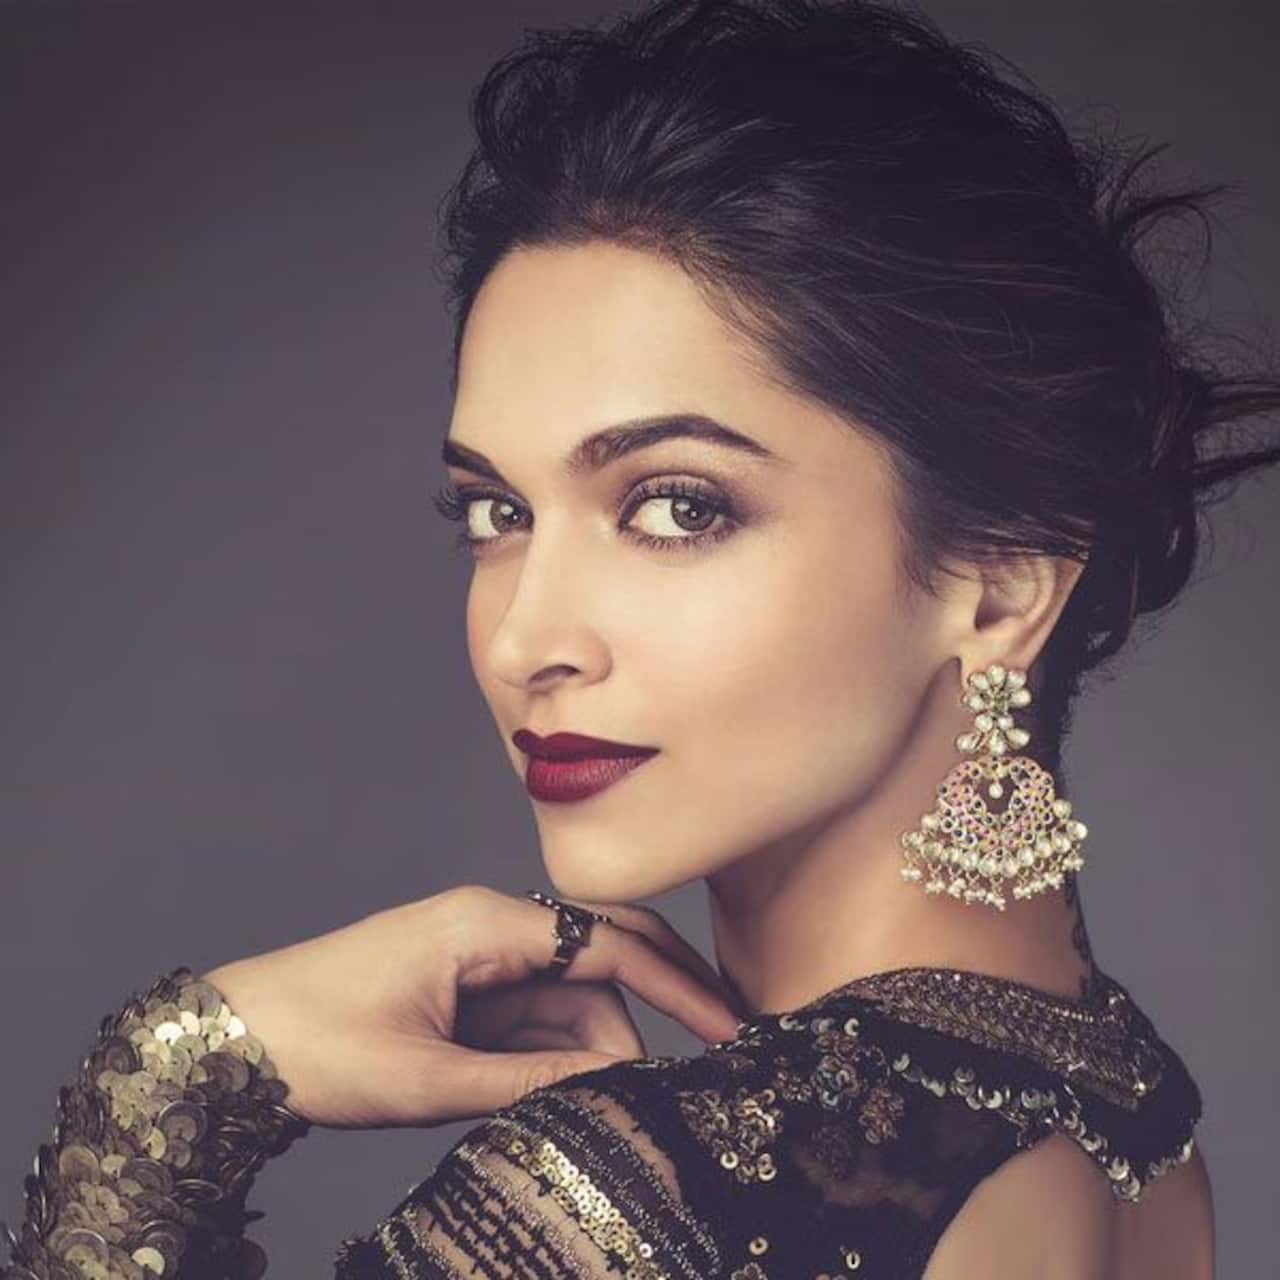 Deepika Padukone was the ADMIN of the drug chat group, reveals NCB